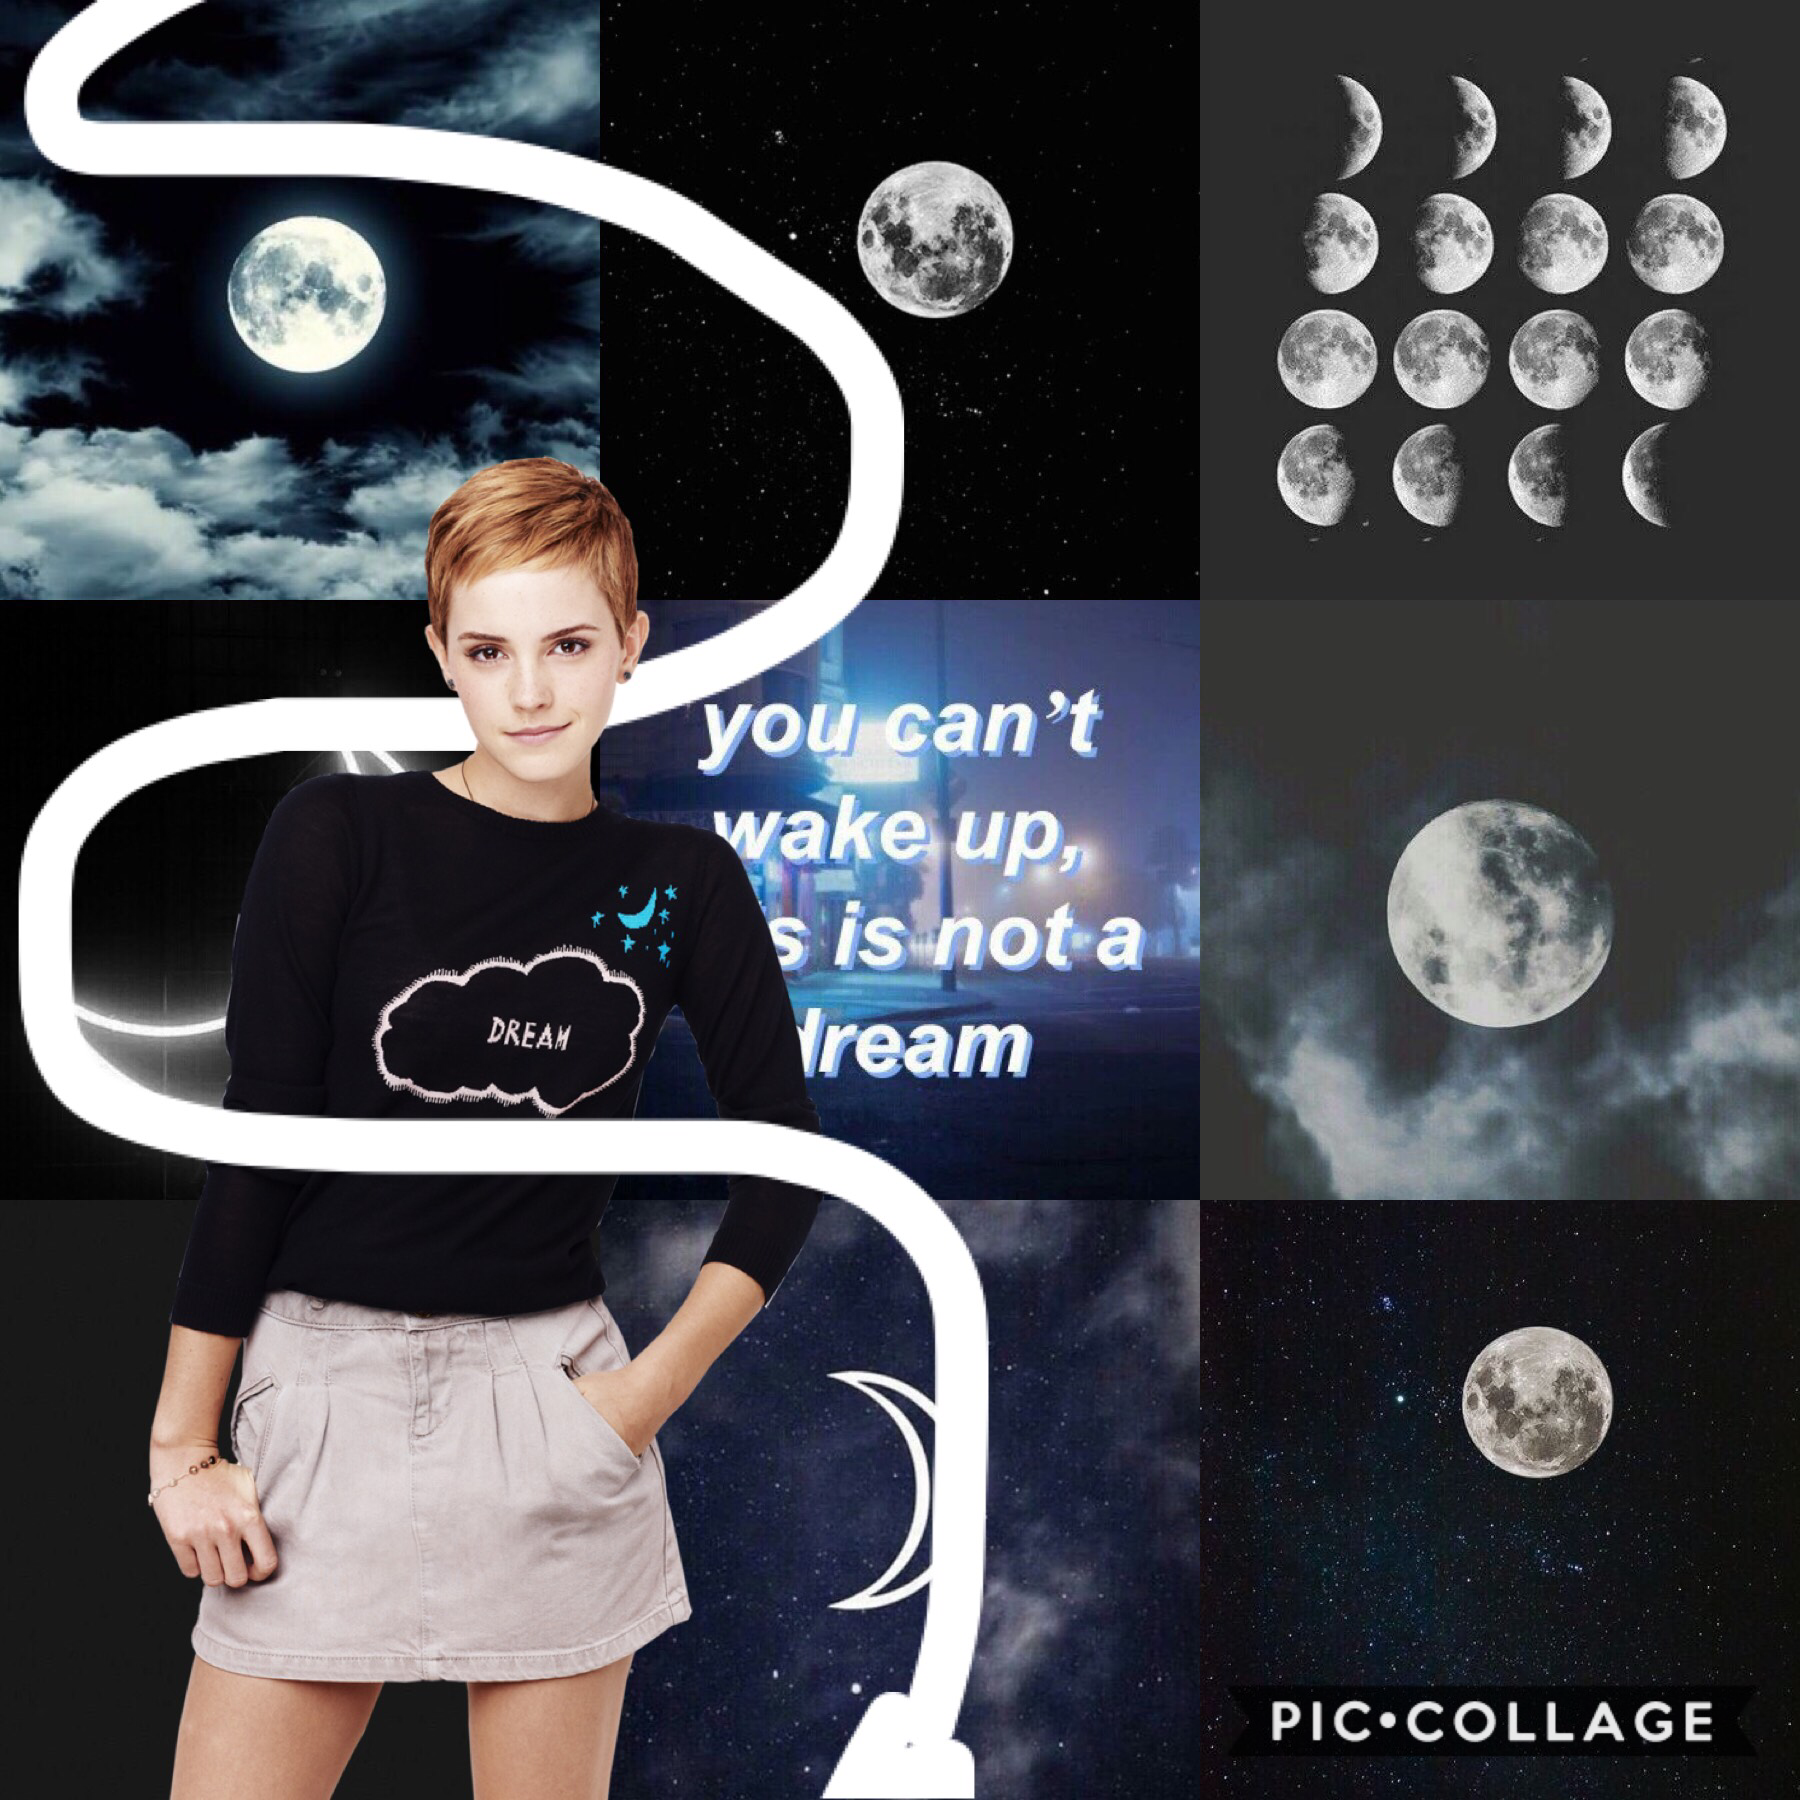 Tap🖤
New theme...
And of course I start it off with Emma🖤
Who should I do next?